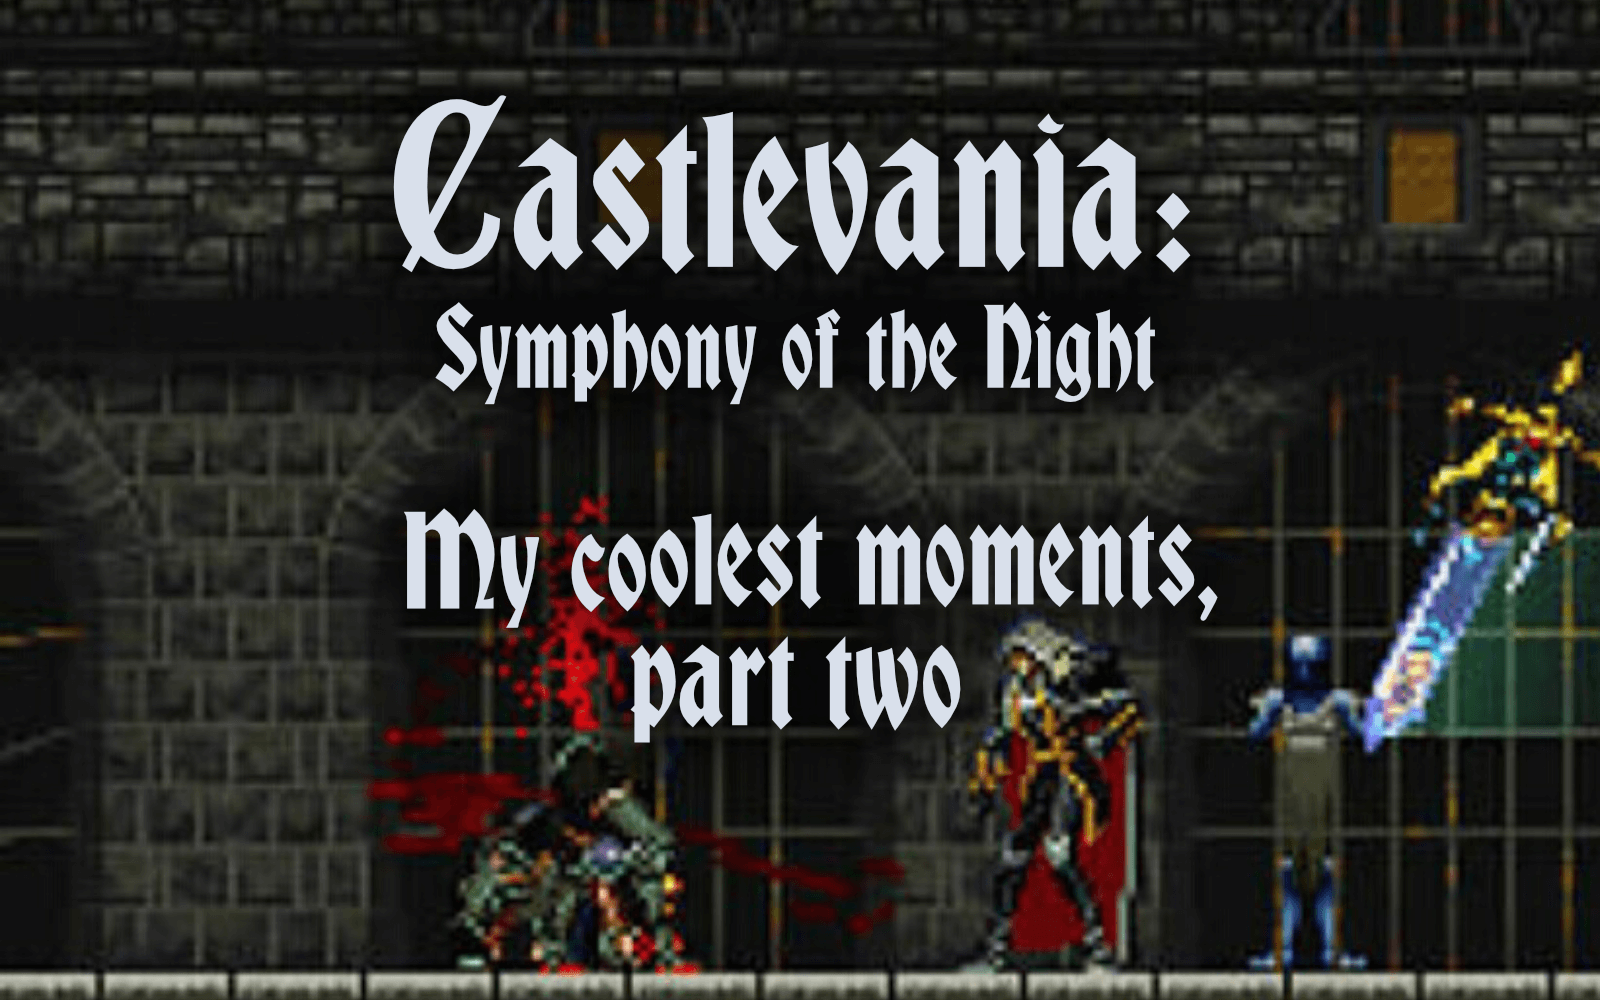 Castlevania: Symphony of the Night – My coolest moments, part two